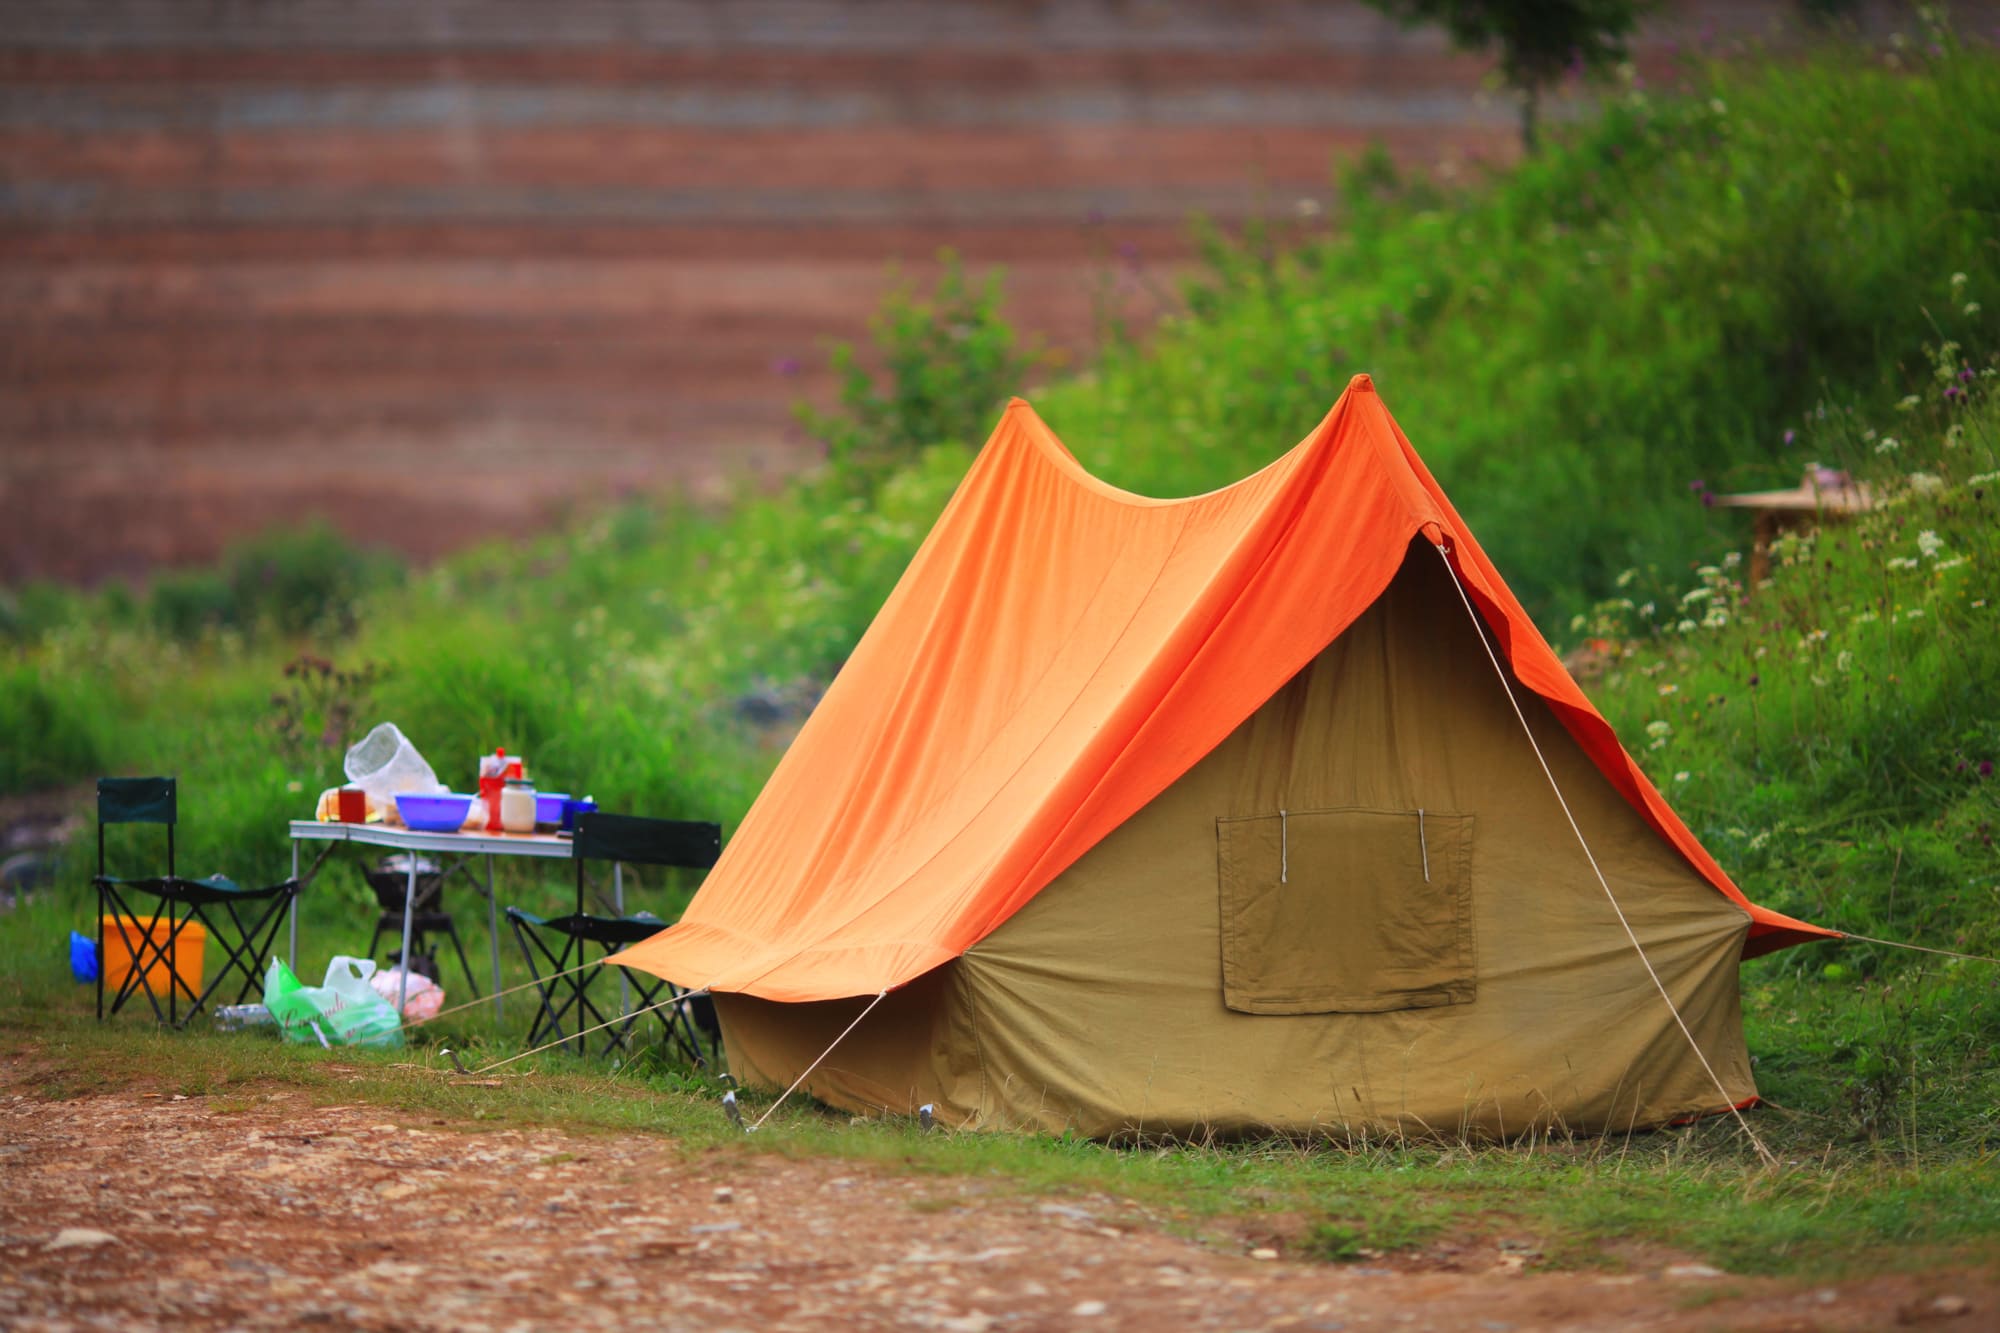 9 Of The Best Canvas Tents For Camping | Camping Pursuits